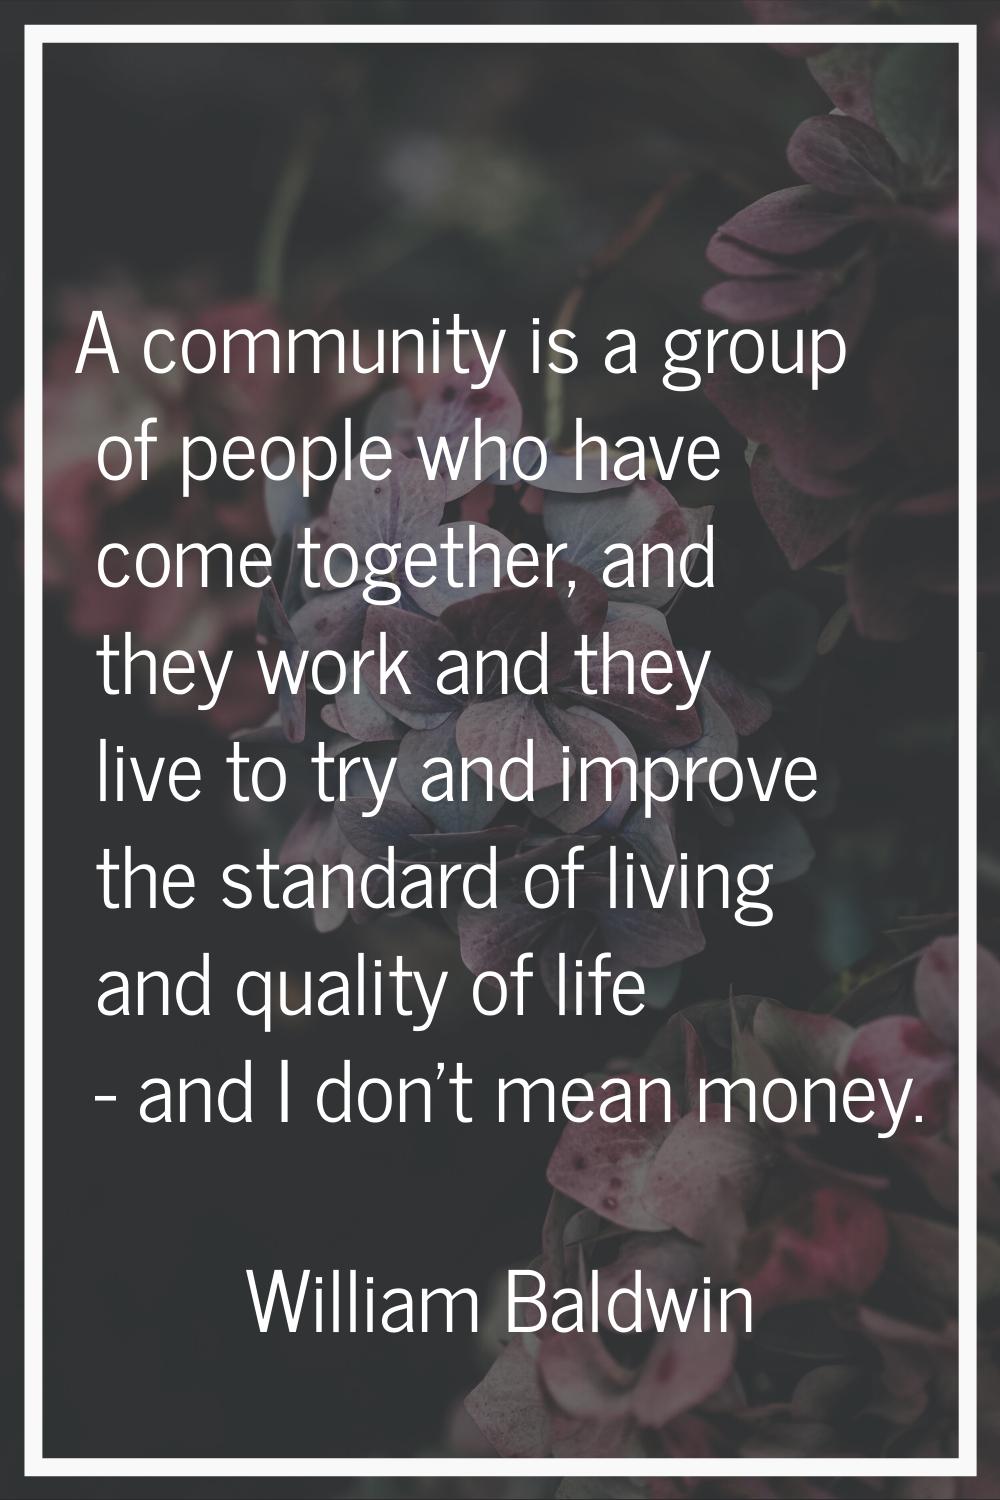 A community is a group of people who have come together, and they work and they live to try and imp